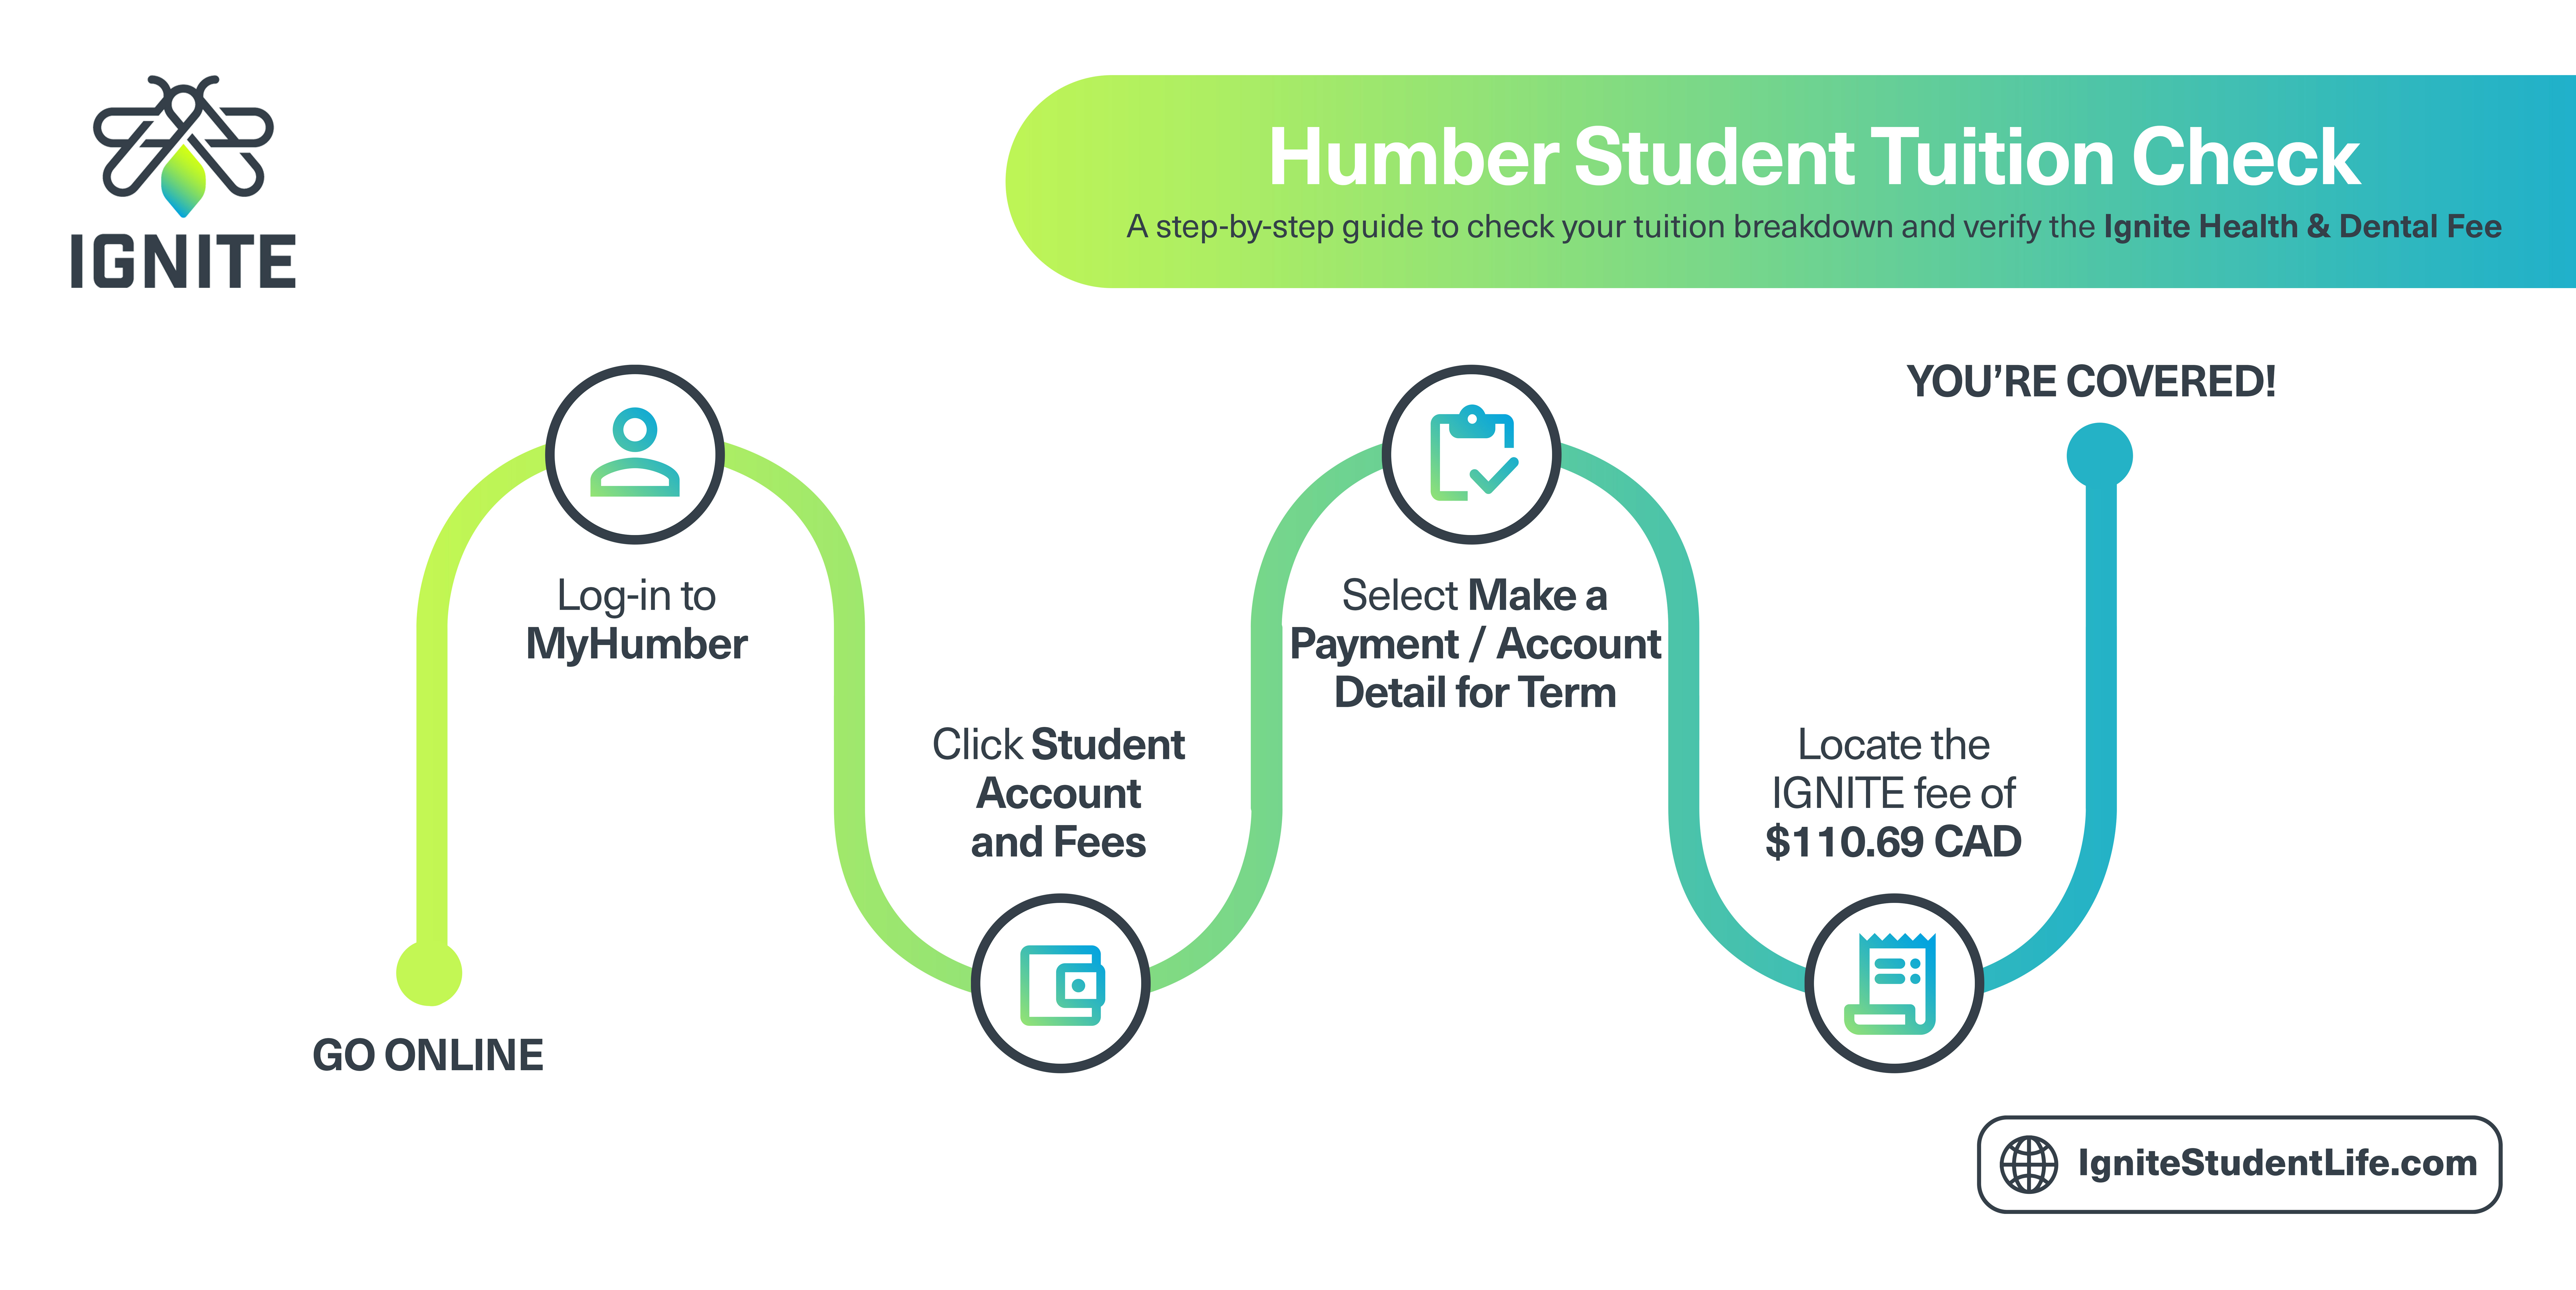 Humber student tuition check